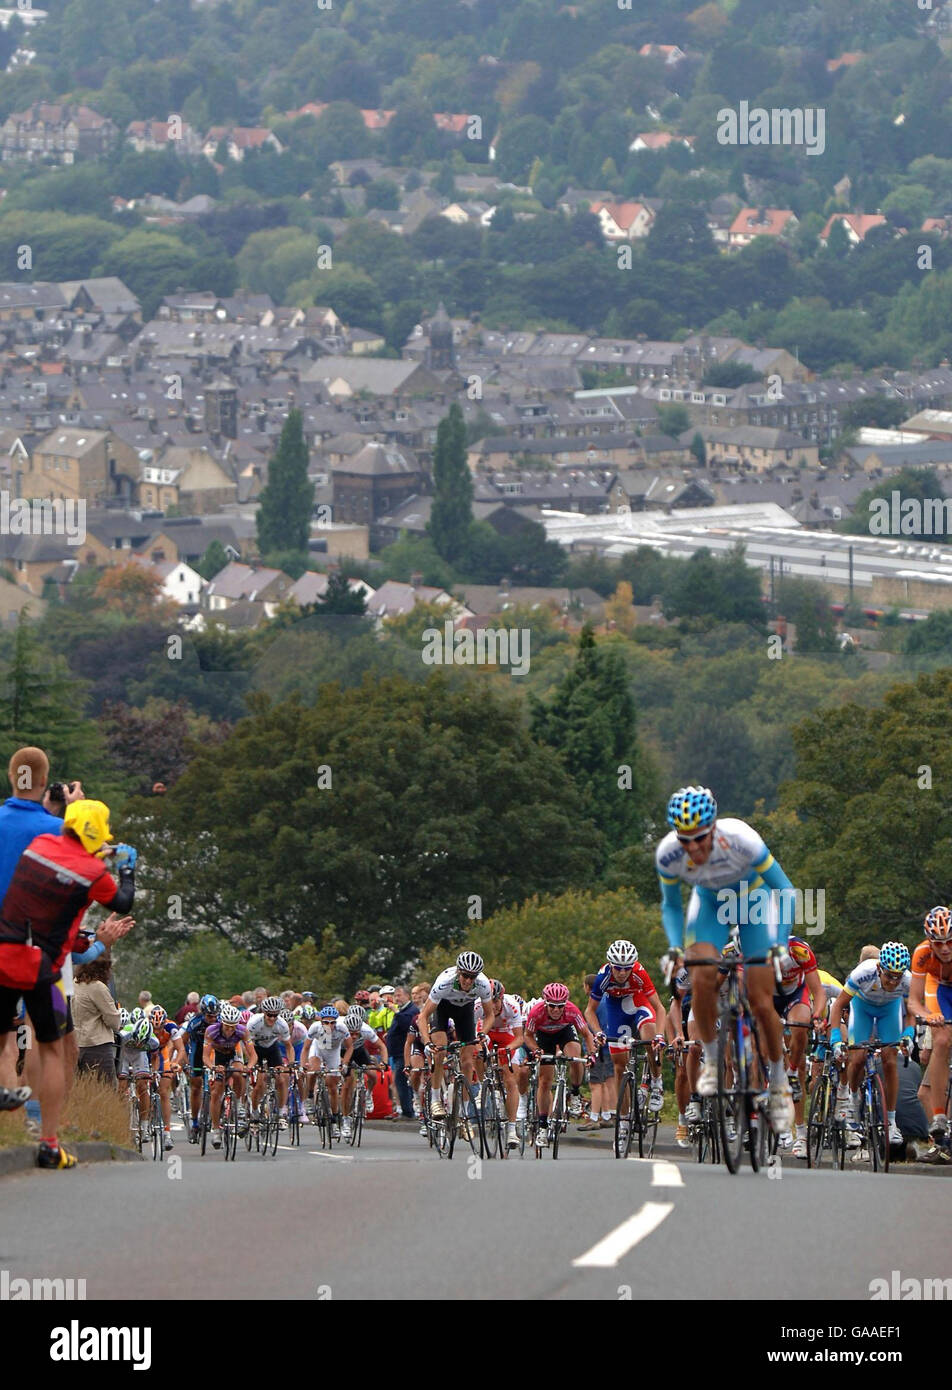 Riders in todays stage of the Tour of Britain Cycle Race start the long climb out of Ilkley passing the Cow and Calf rocks before the finish in Bradford during the Tour of Britain, England. Stock Photo